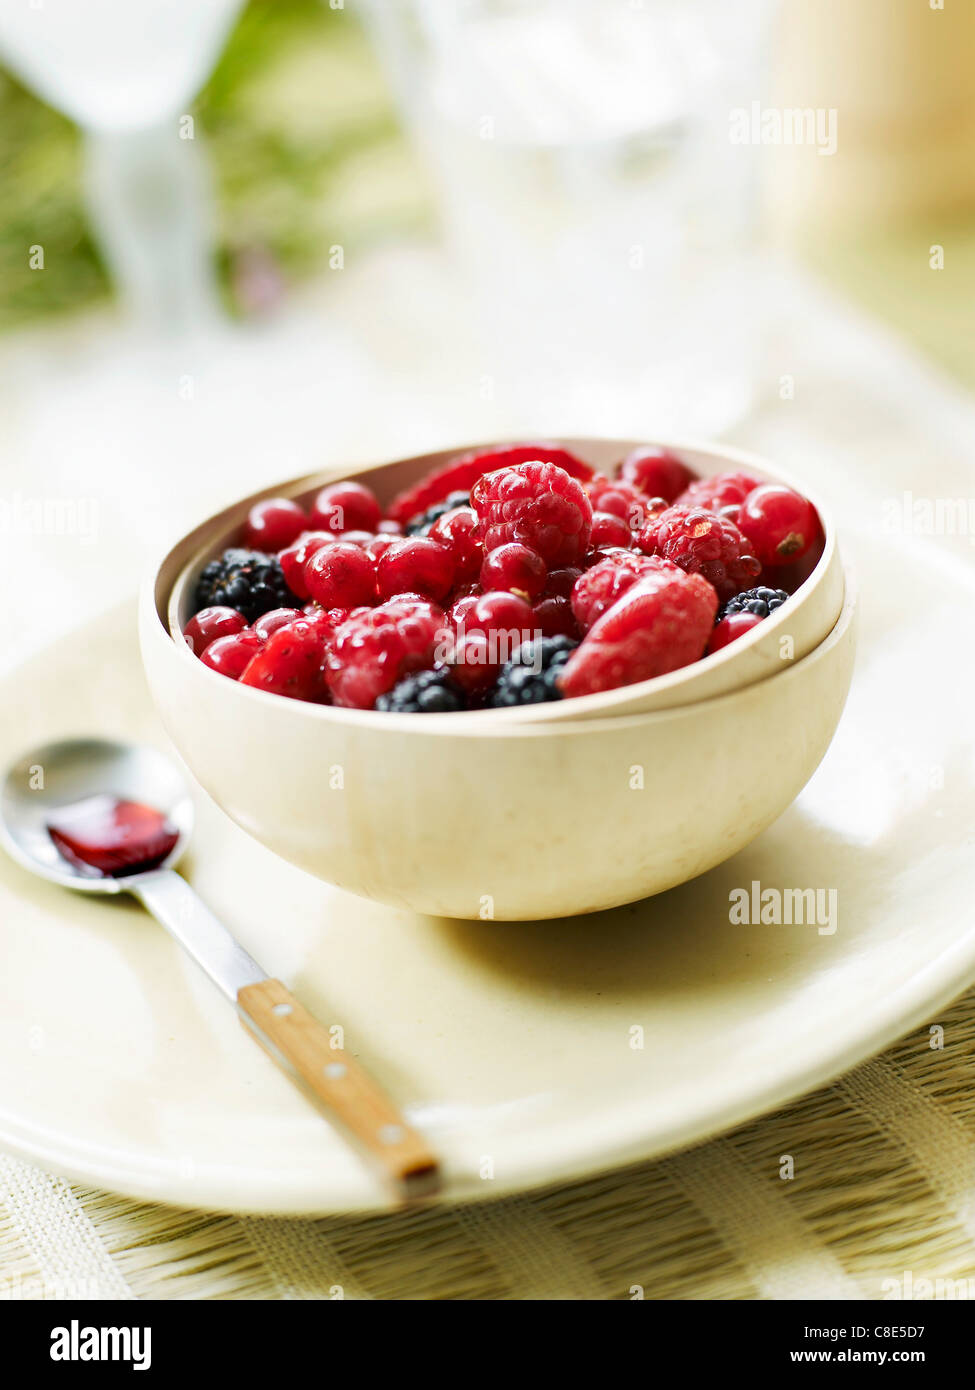 Summer fruit with red wine Stock Photo